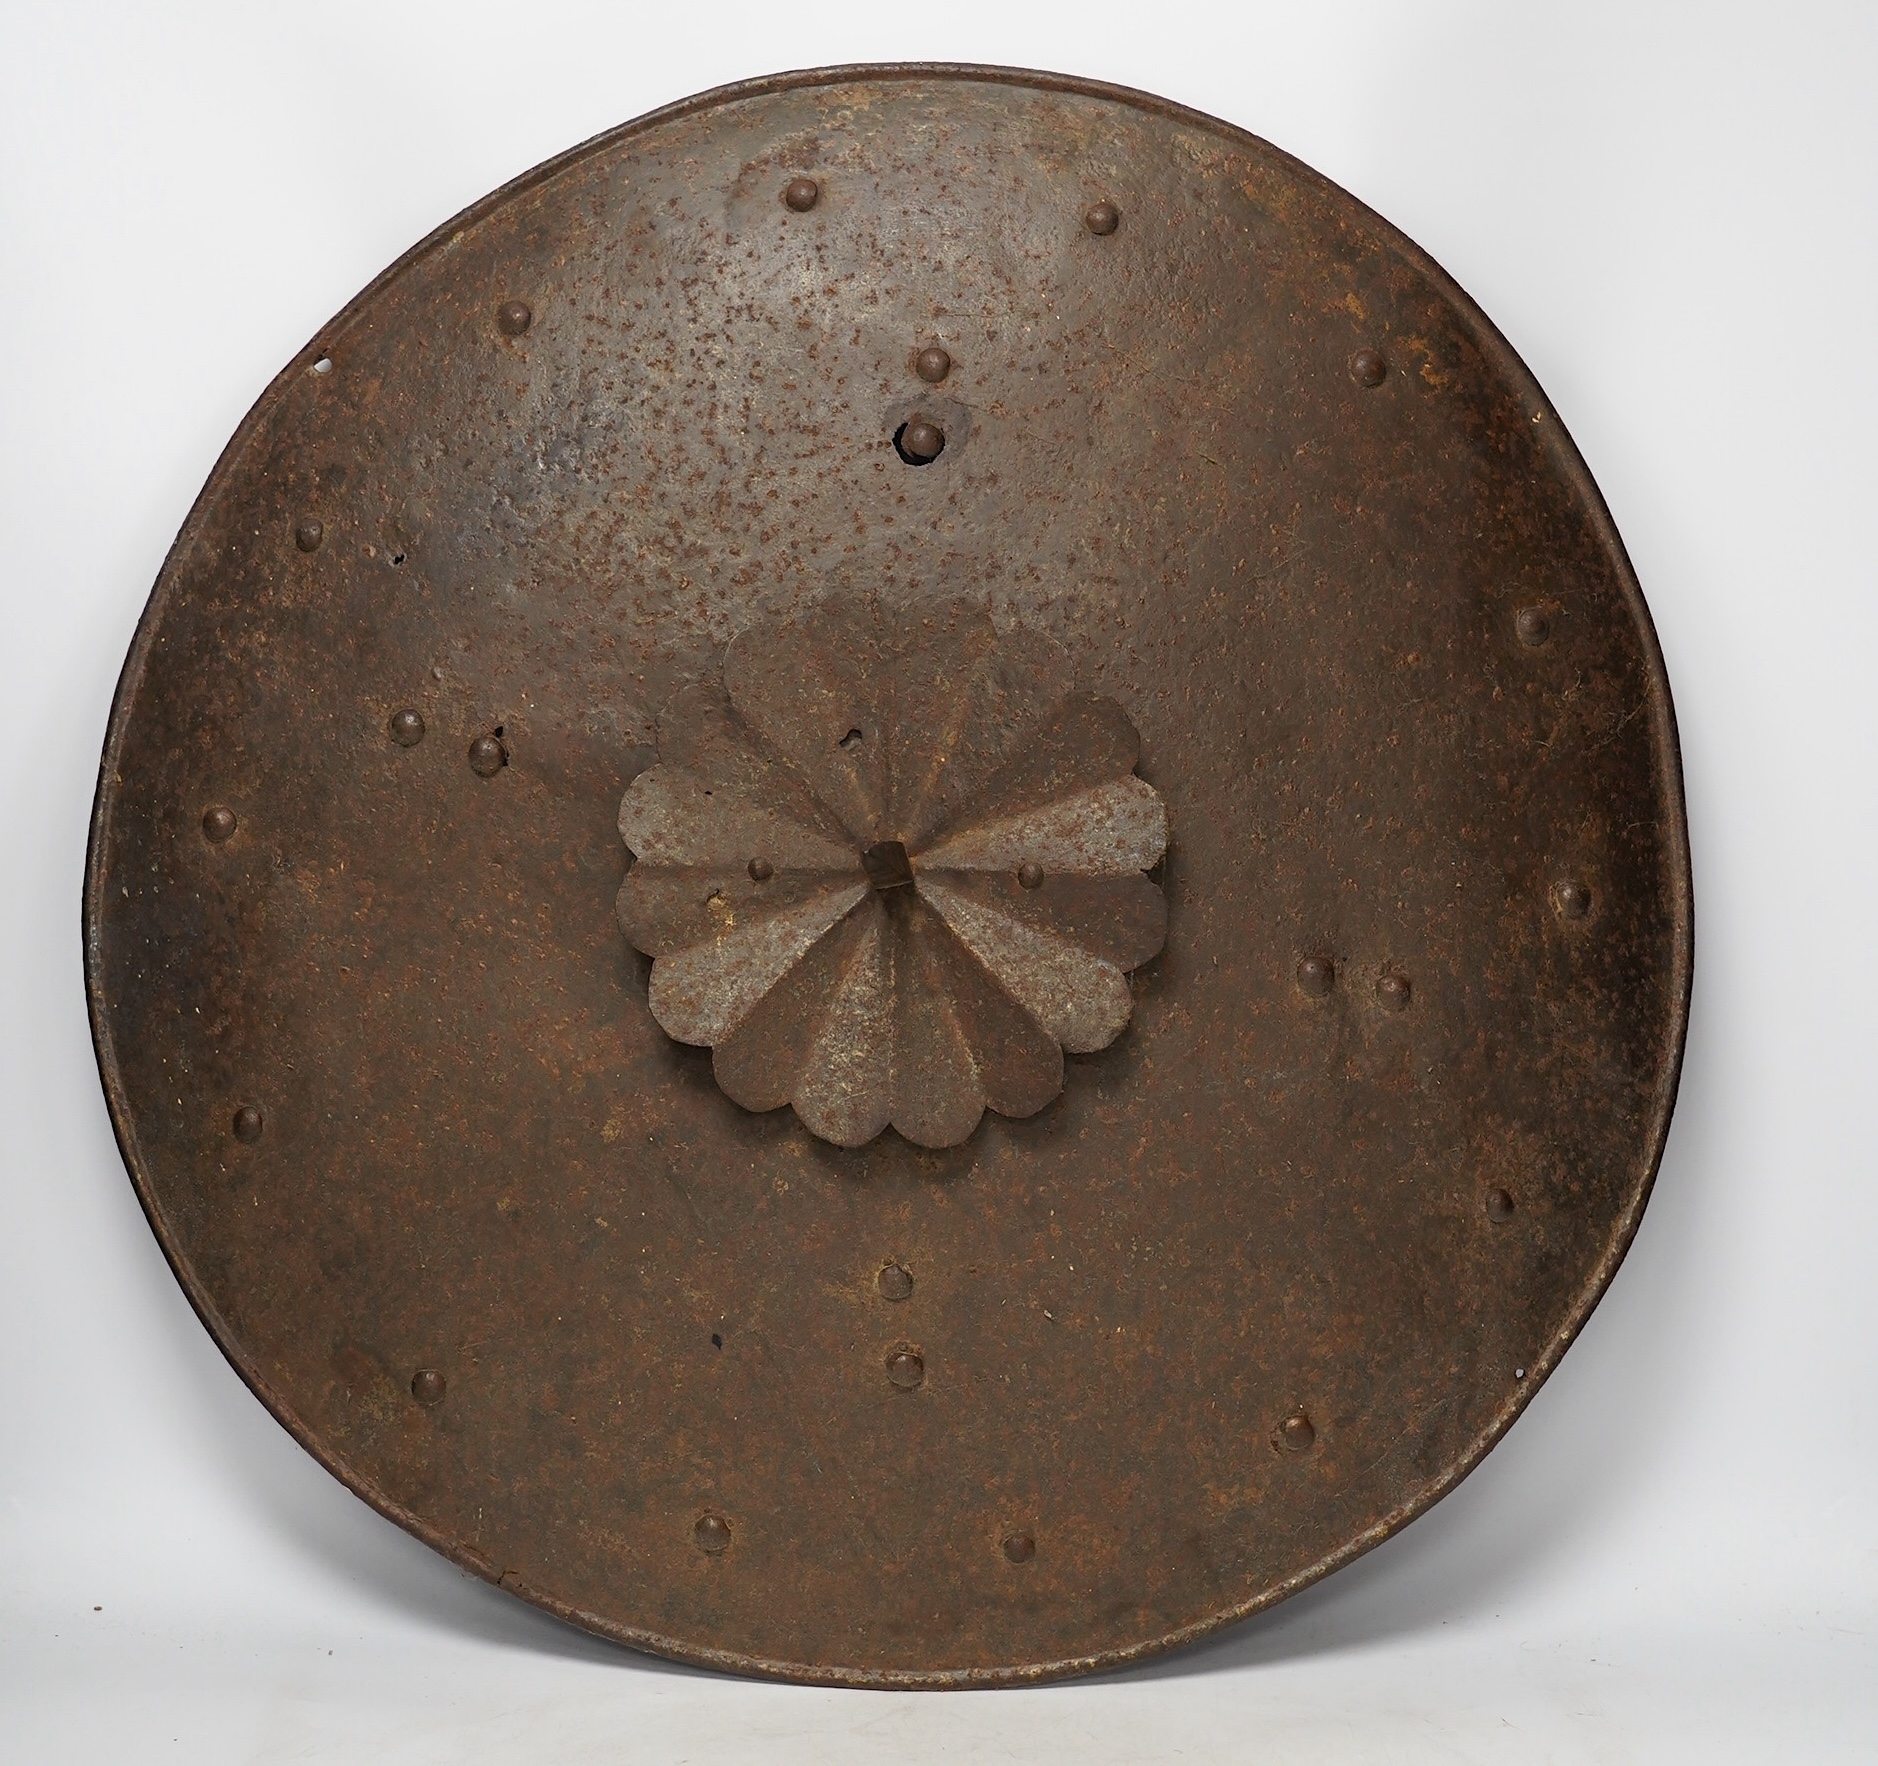 A 19th century iron shield with centre spike, formally part of a suit of armour, 57.5cm diameter. Condition - poor, surface rust and pitting overall